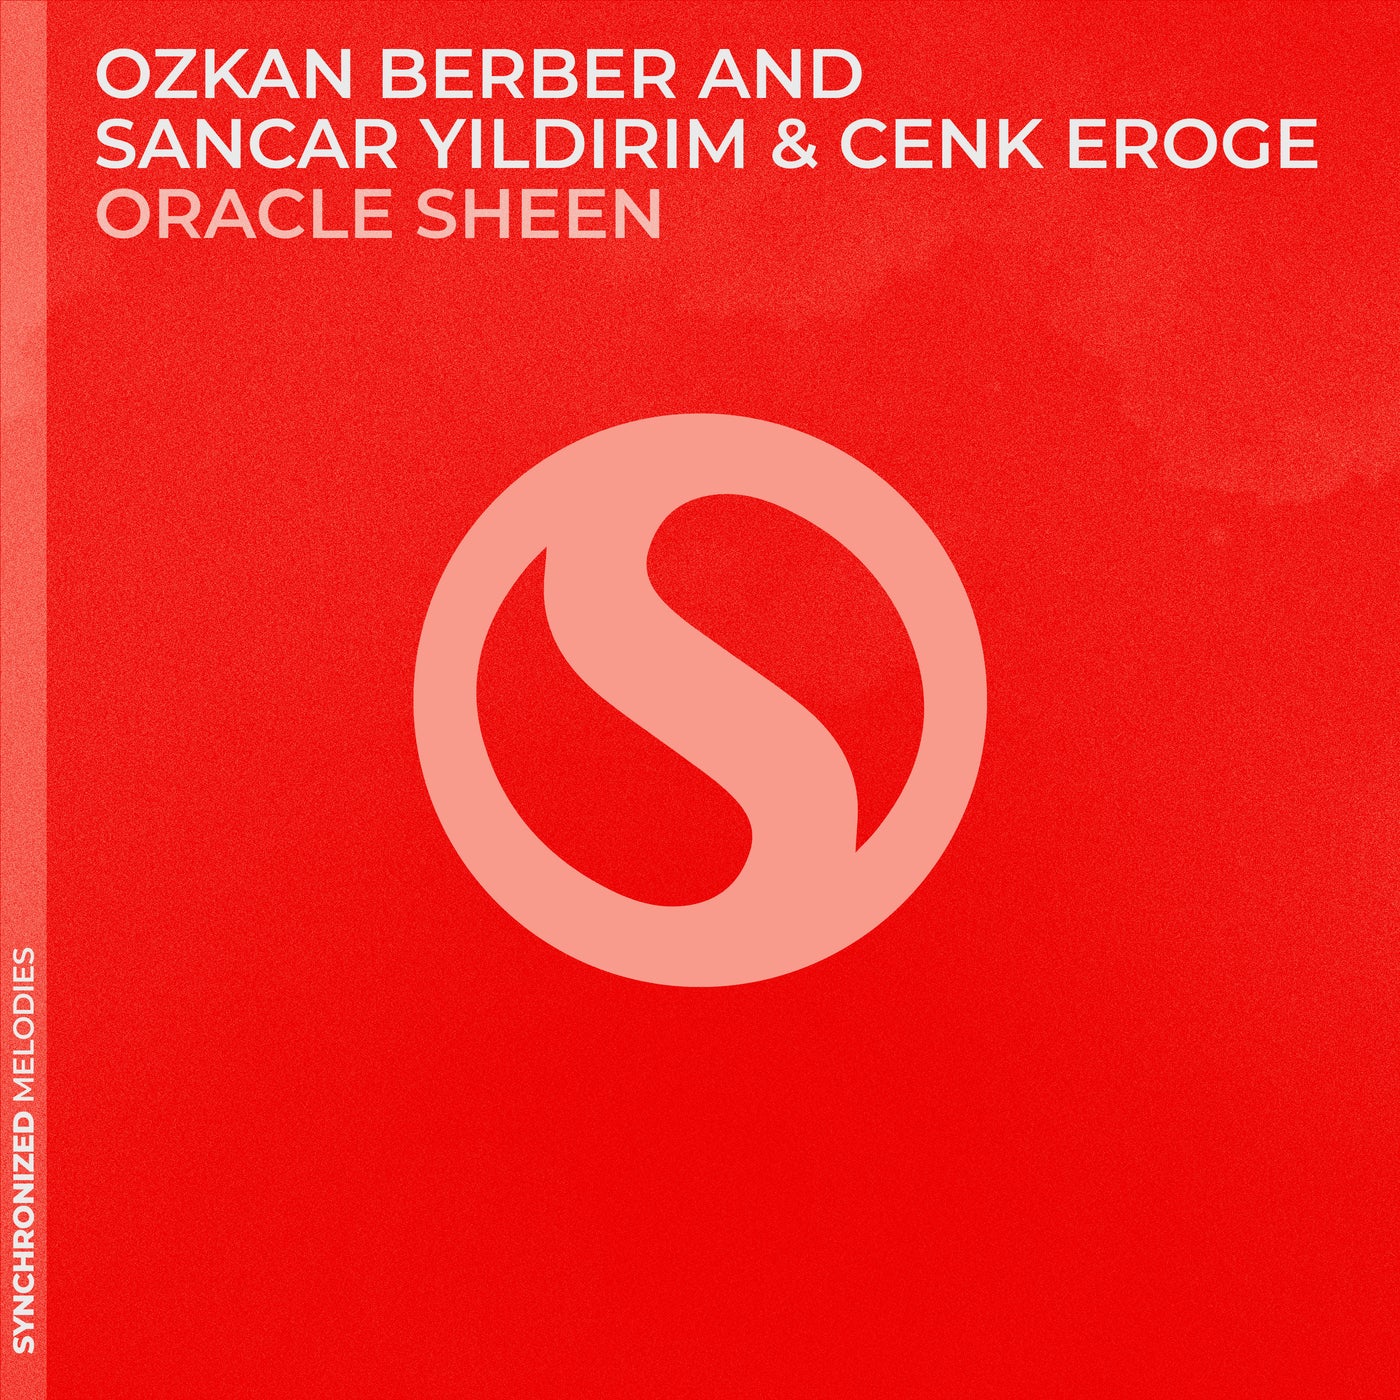 Oracle Sheen